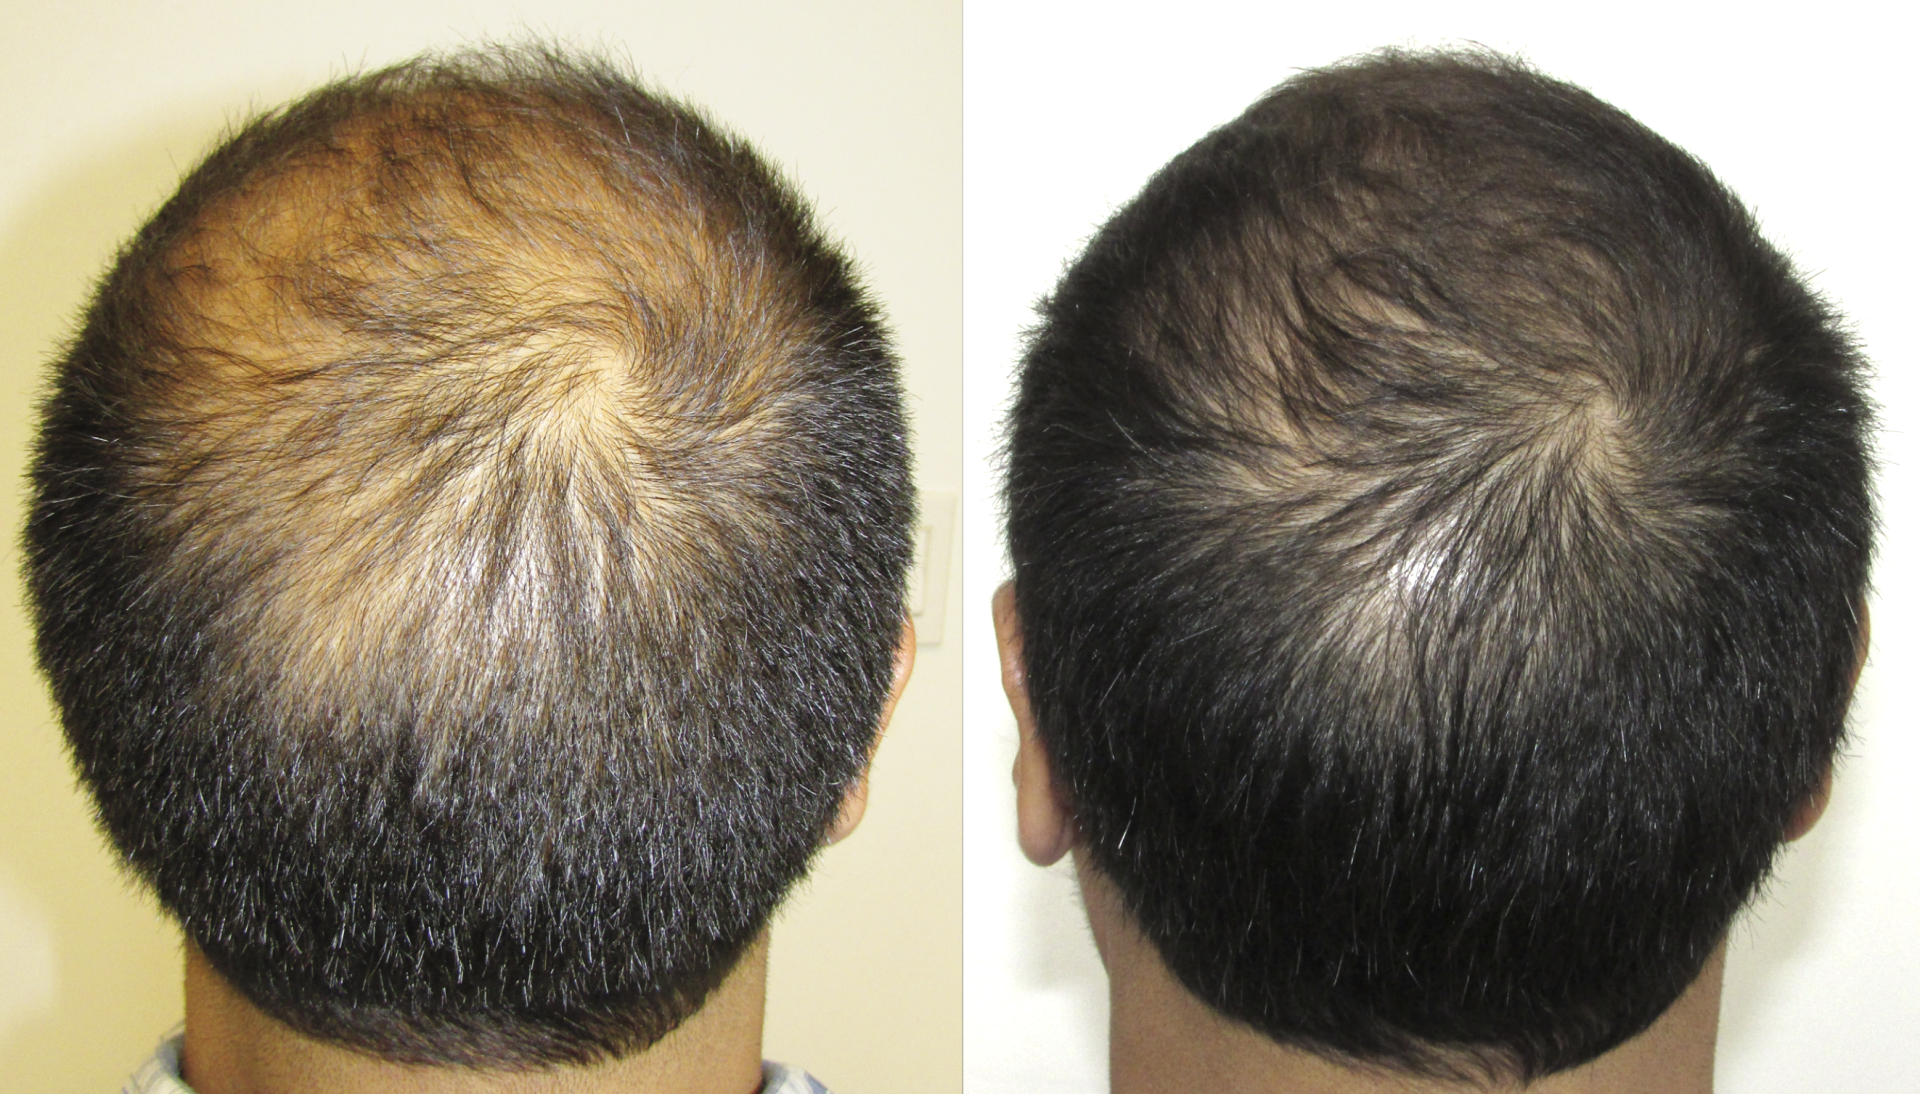 balding crown hair regrows from the outside in - before and after